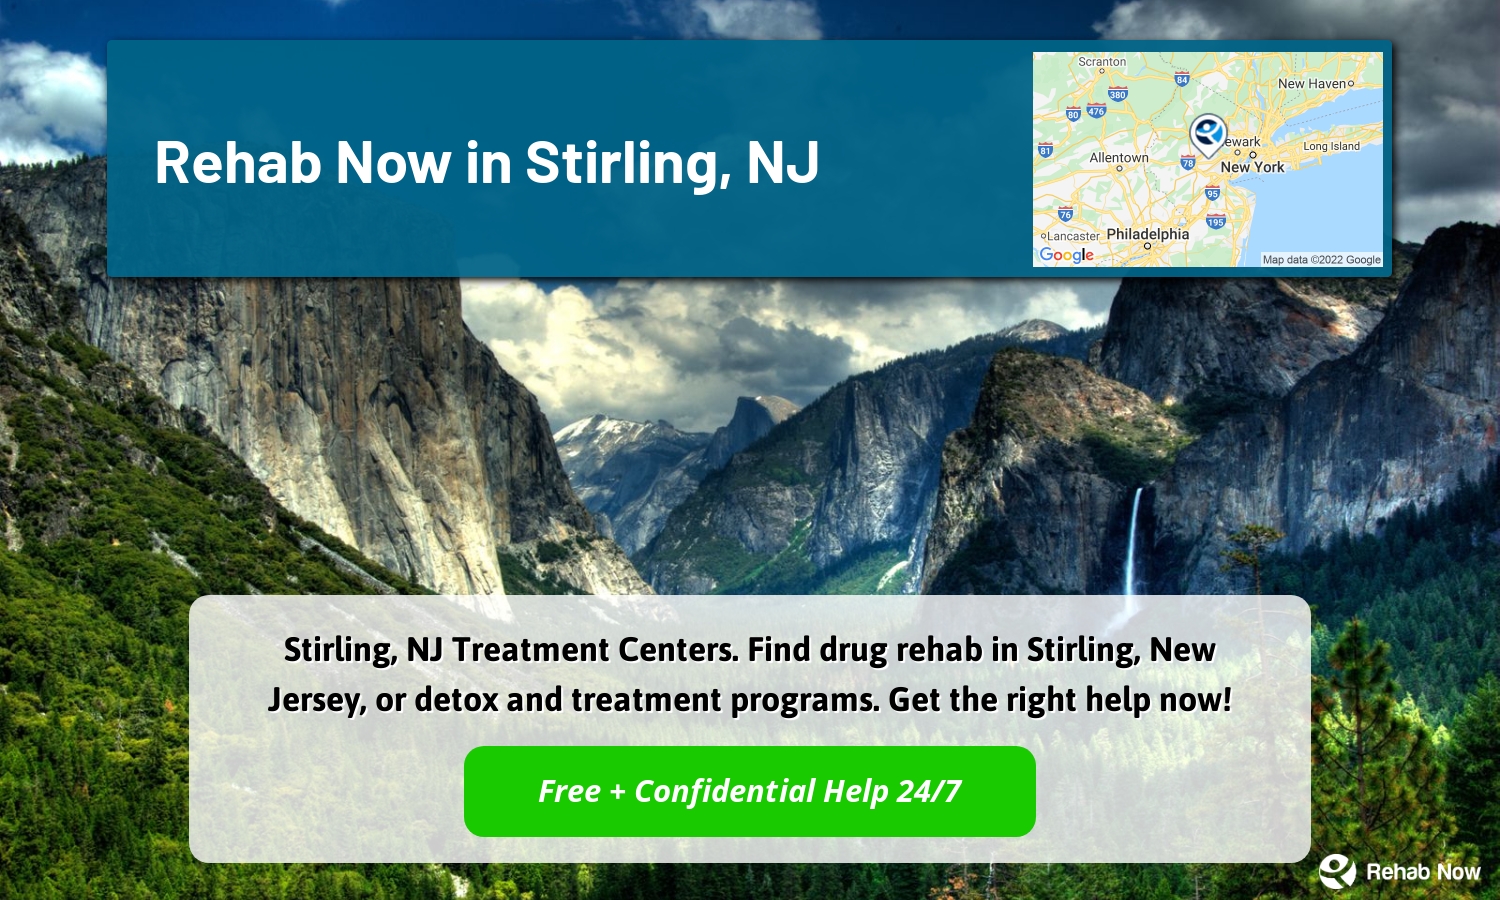 Stirling, NJ Treatment Centers. Find drug rehab in Stirling, New Jersey, or detox and treatment programs. Get the right help now!